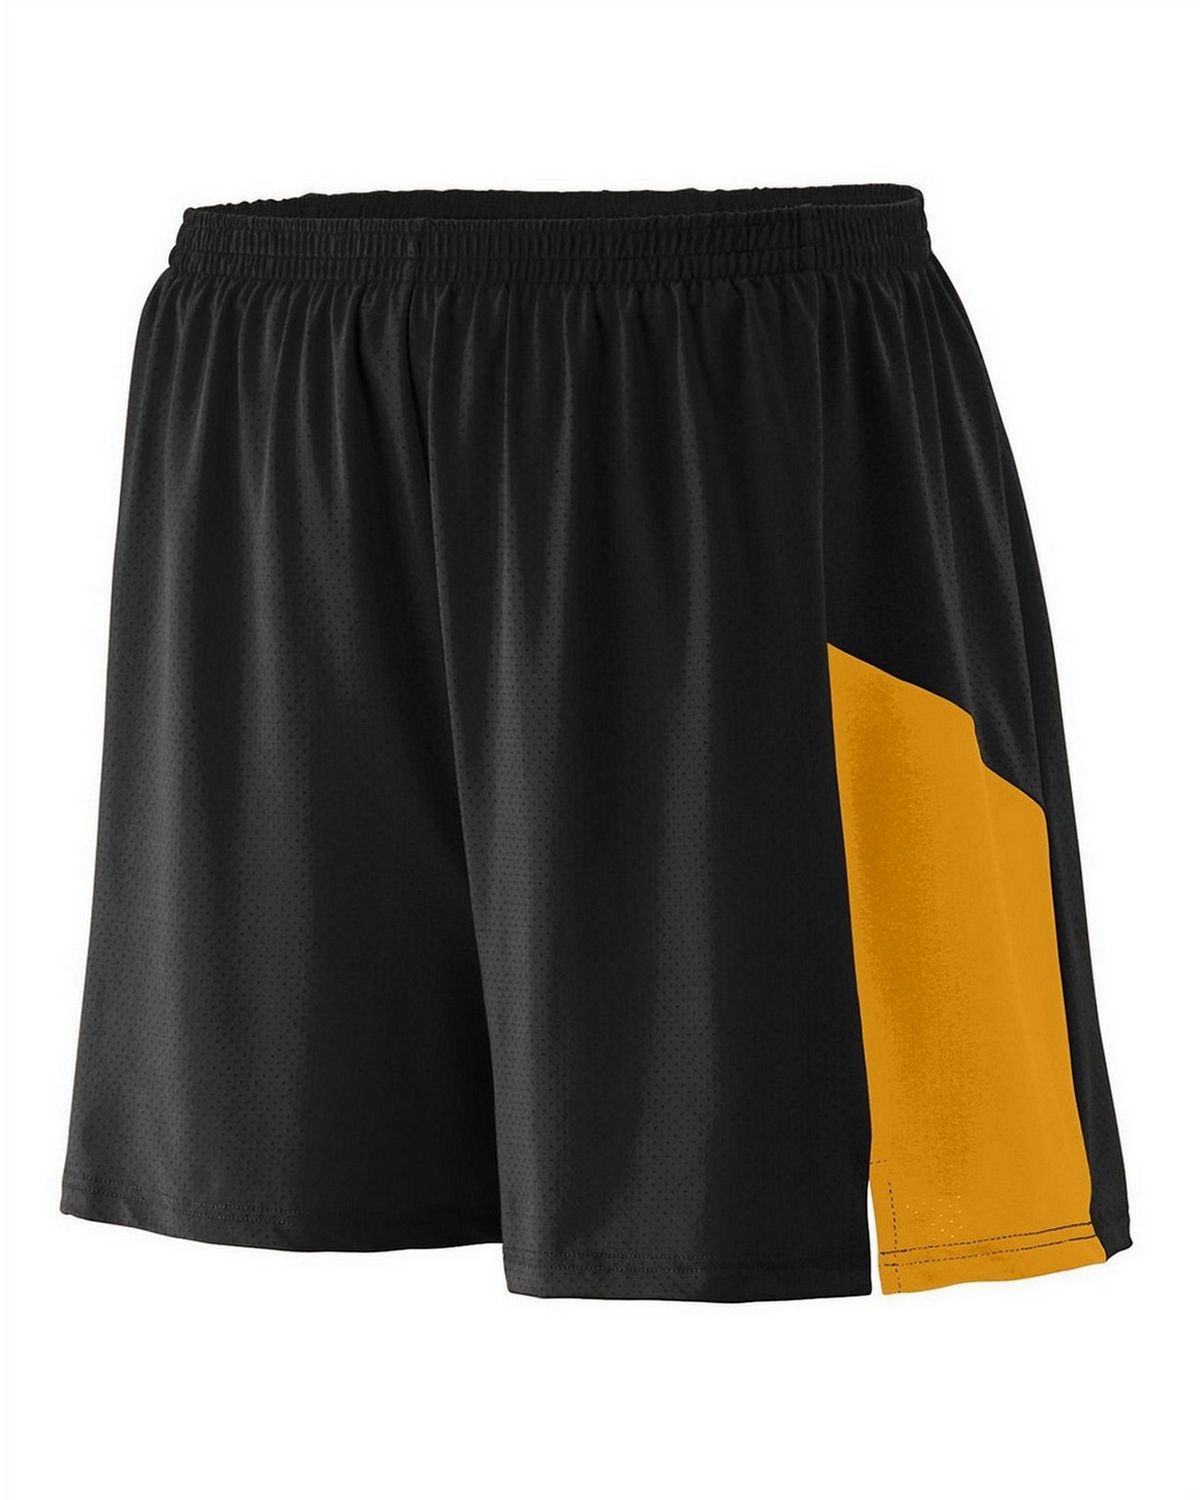 Augusta Sportswear 335 Men's Wicking Poly/Span Short with Inserts